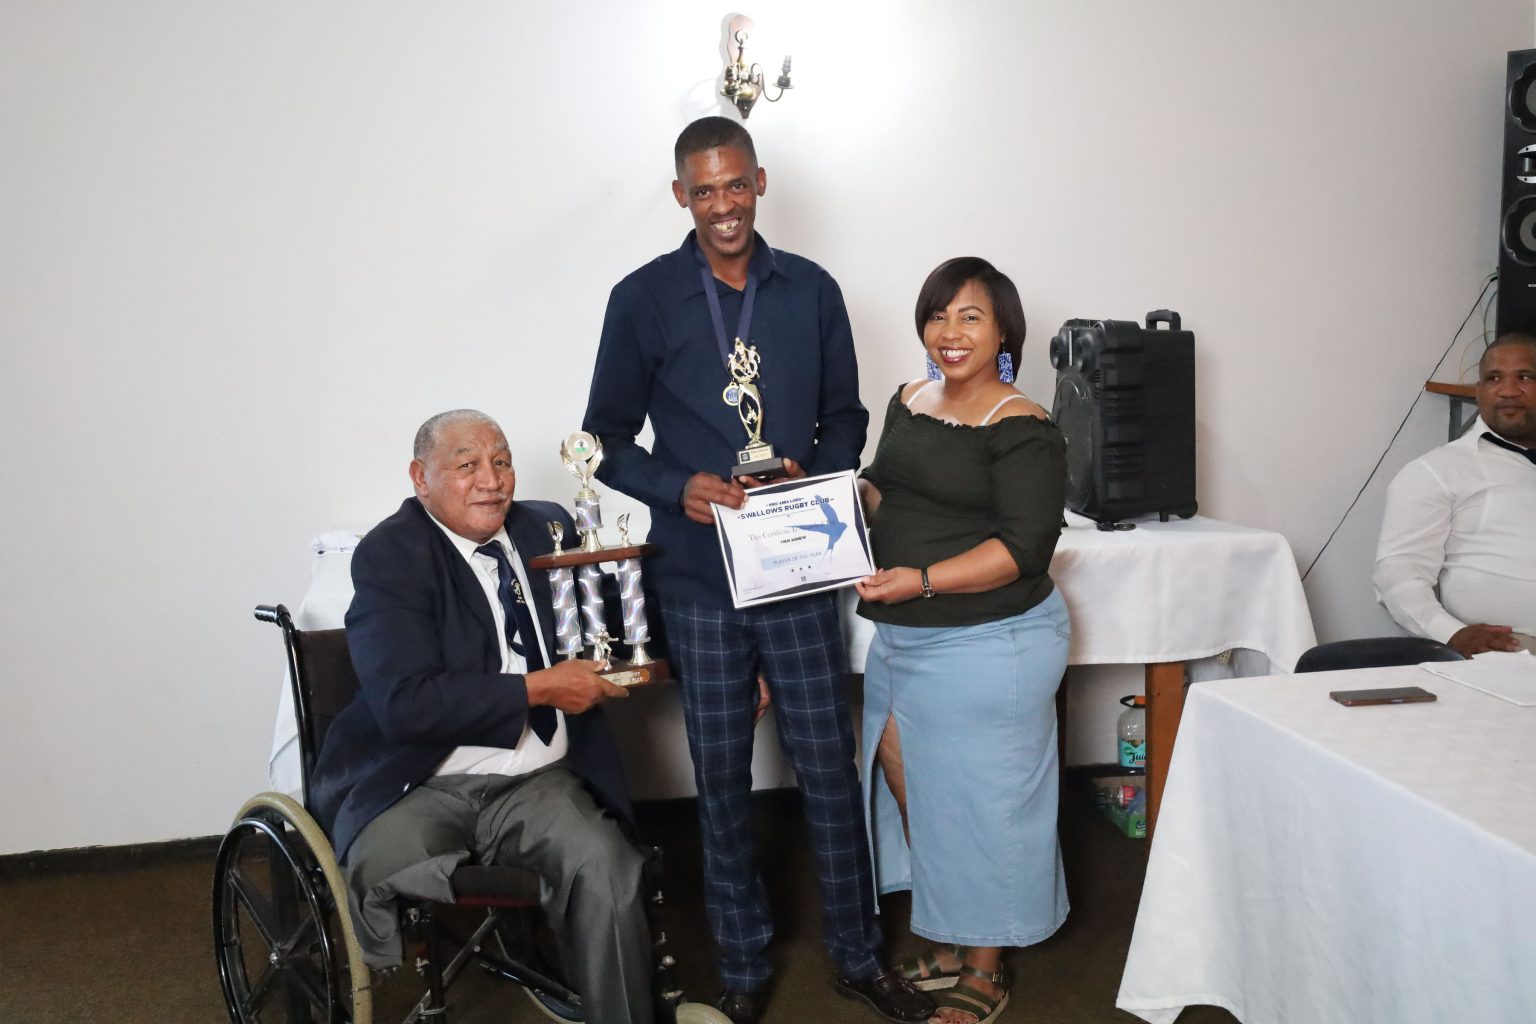 Ivan Motta Agnew received the Prestigious Player of the Year Award at the Club's recent Annual Awards Ceremony at the Albany Sports Club. Swallows Honorary Life President Ralph Douglas (left) handing over the award with Secretary Cindy Bokbaard (right). Photo: Kivitts Photography